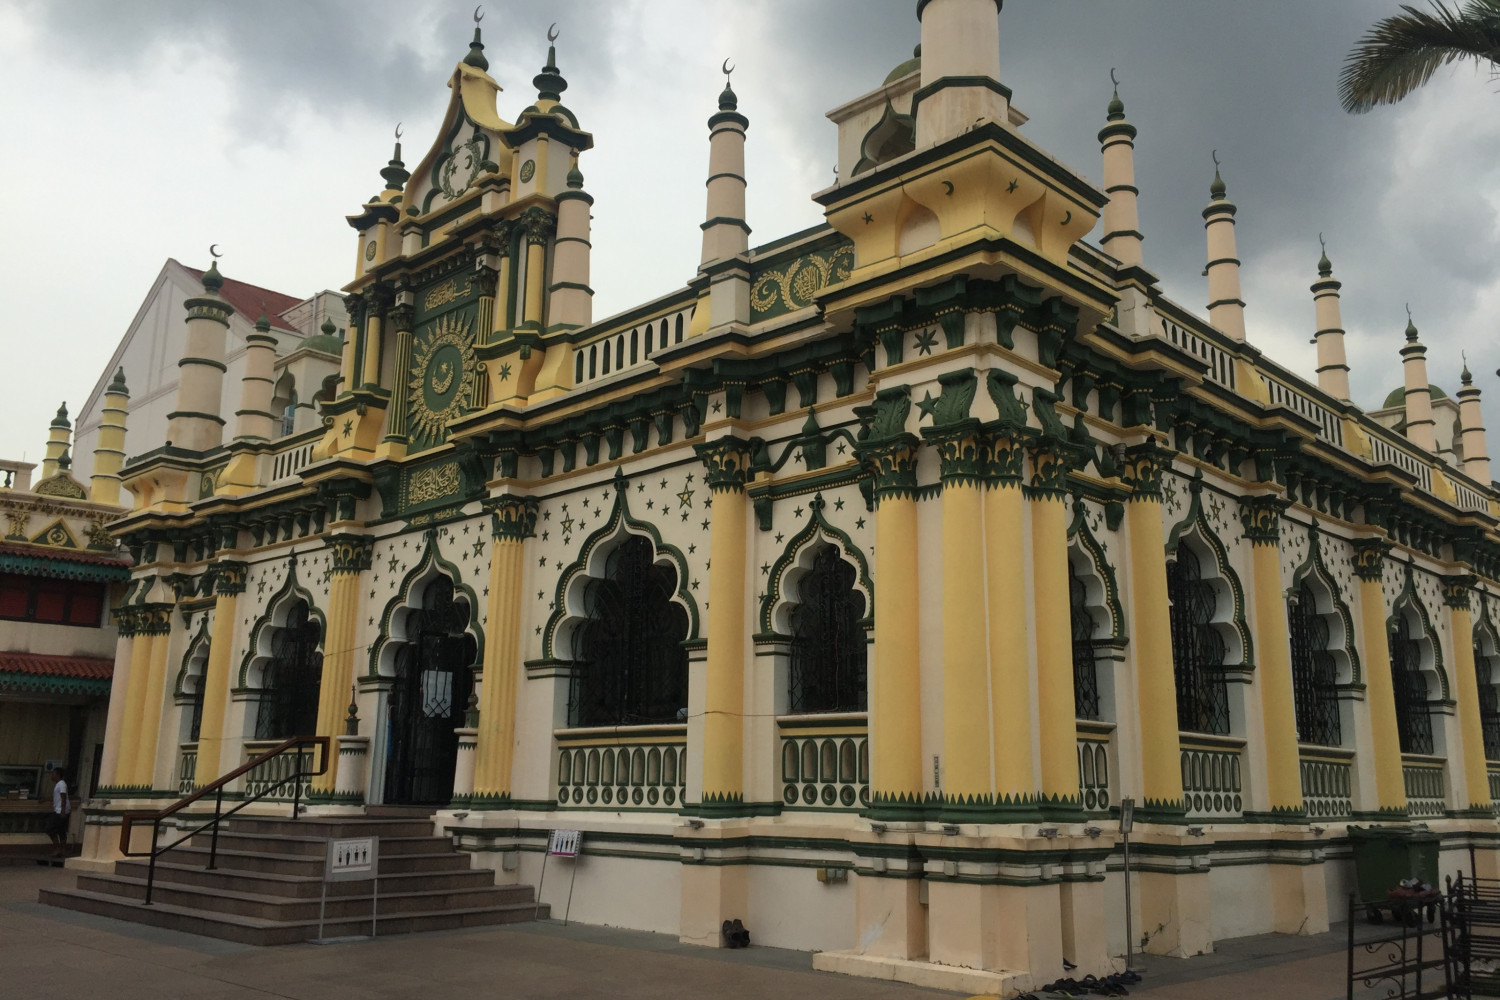 Little India Mosque in Singapore